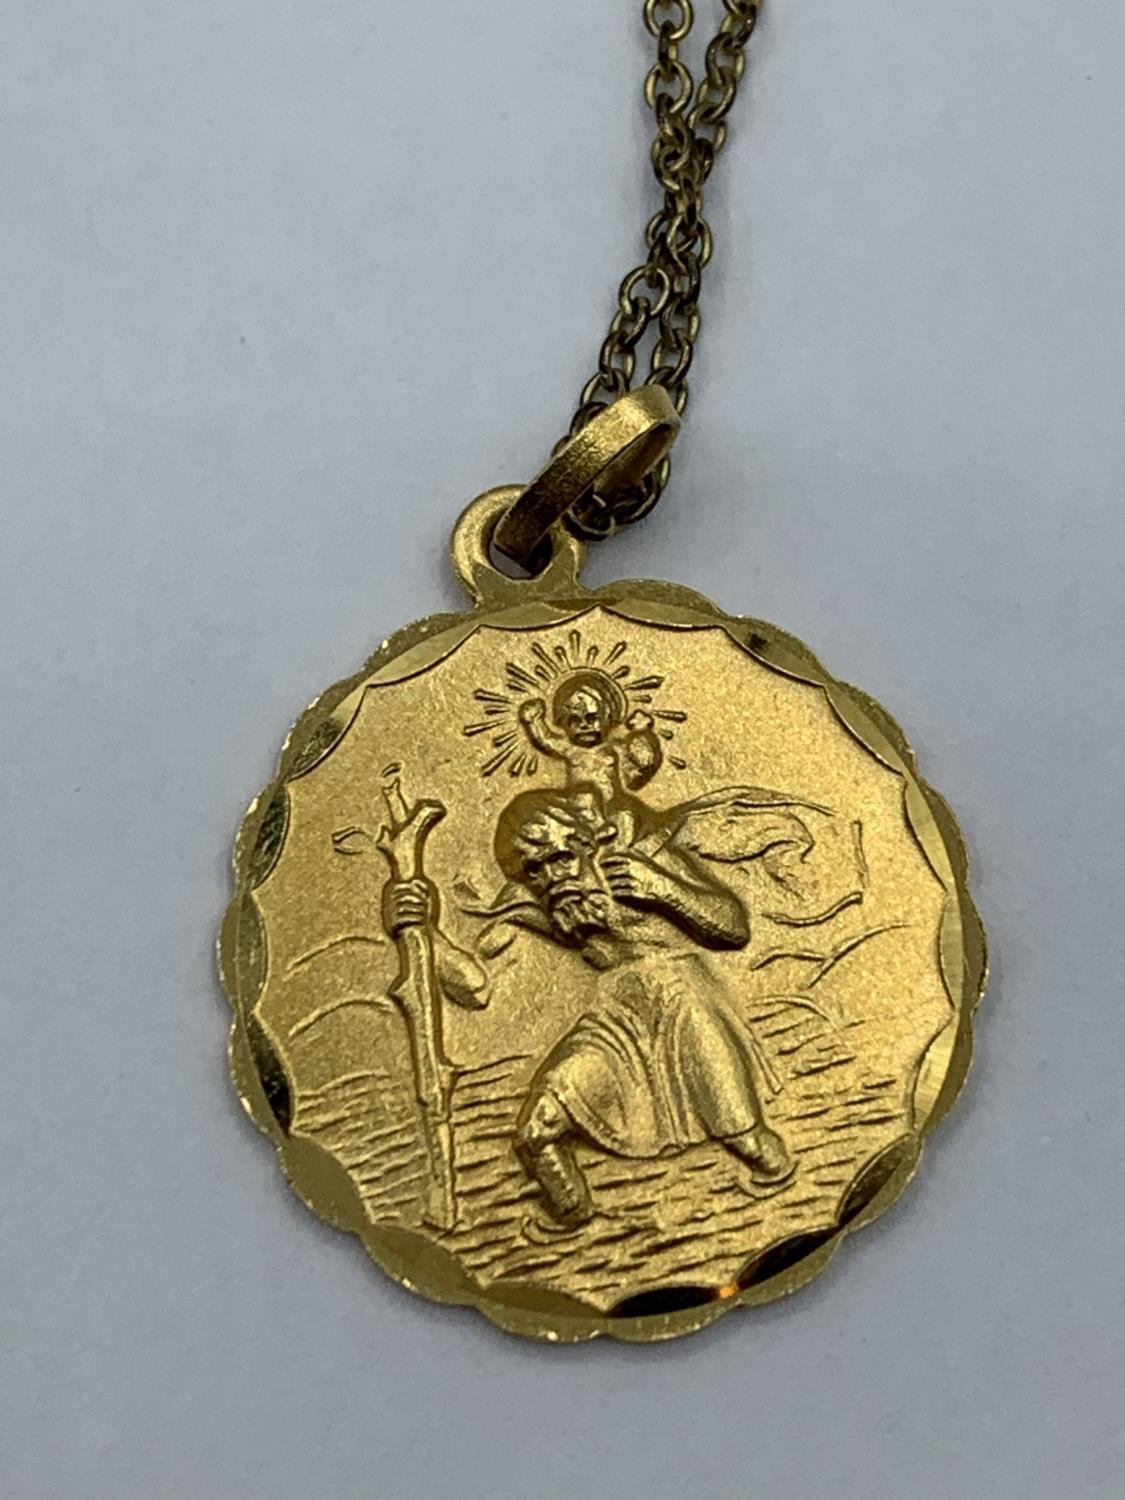 Yellow metal St Christopher pendant on 46cm necklace, weight 3.6g - Image 5 of 5